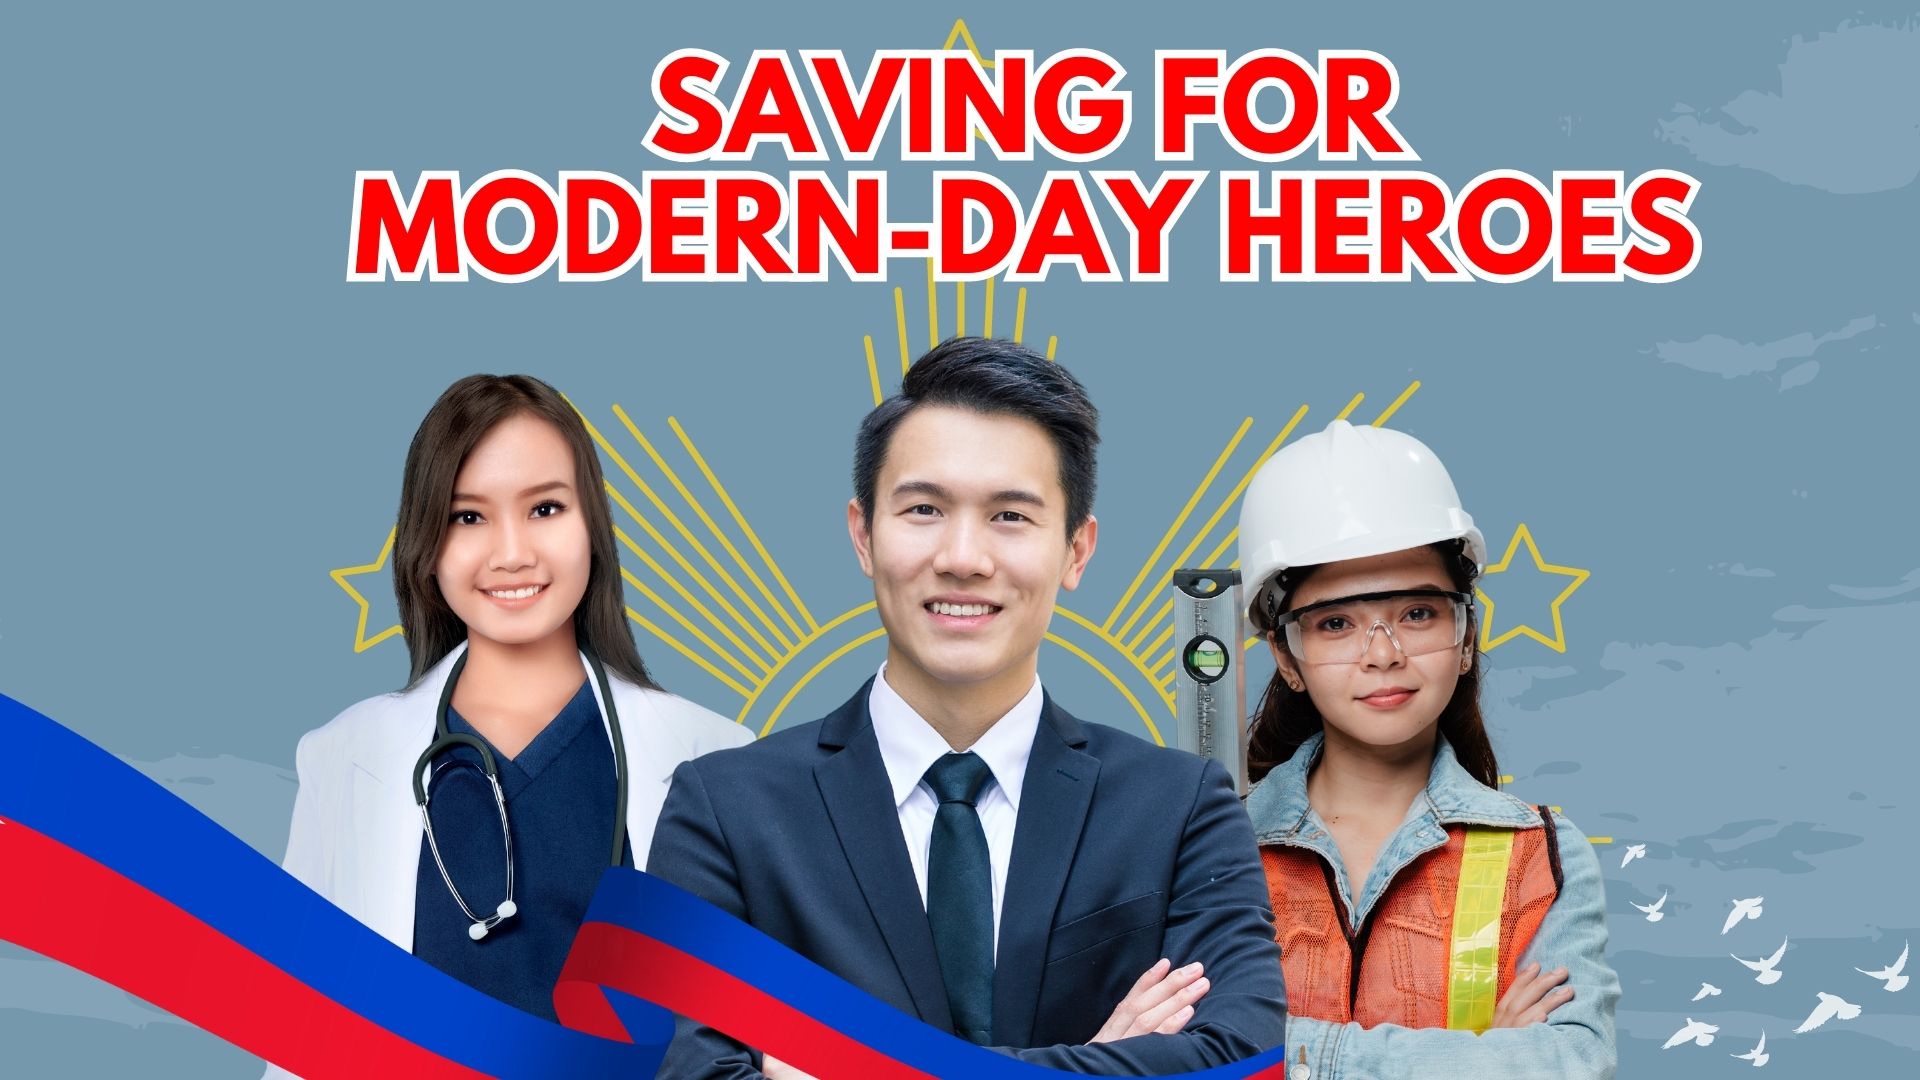 SAVING FOR MODERN-DAY HEROES